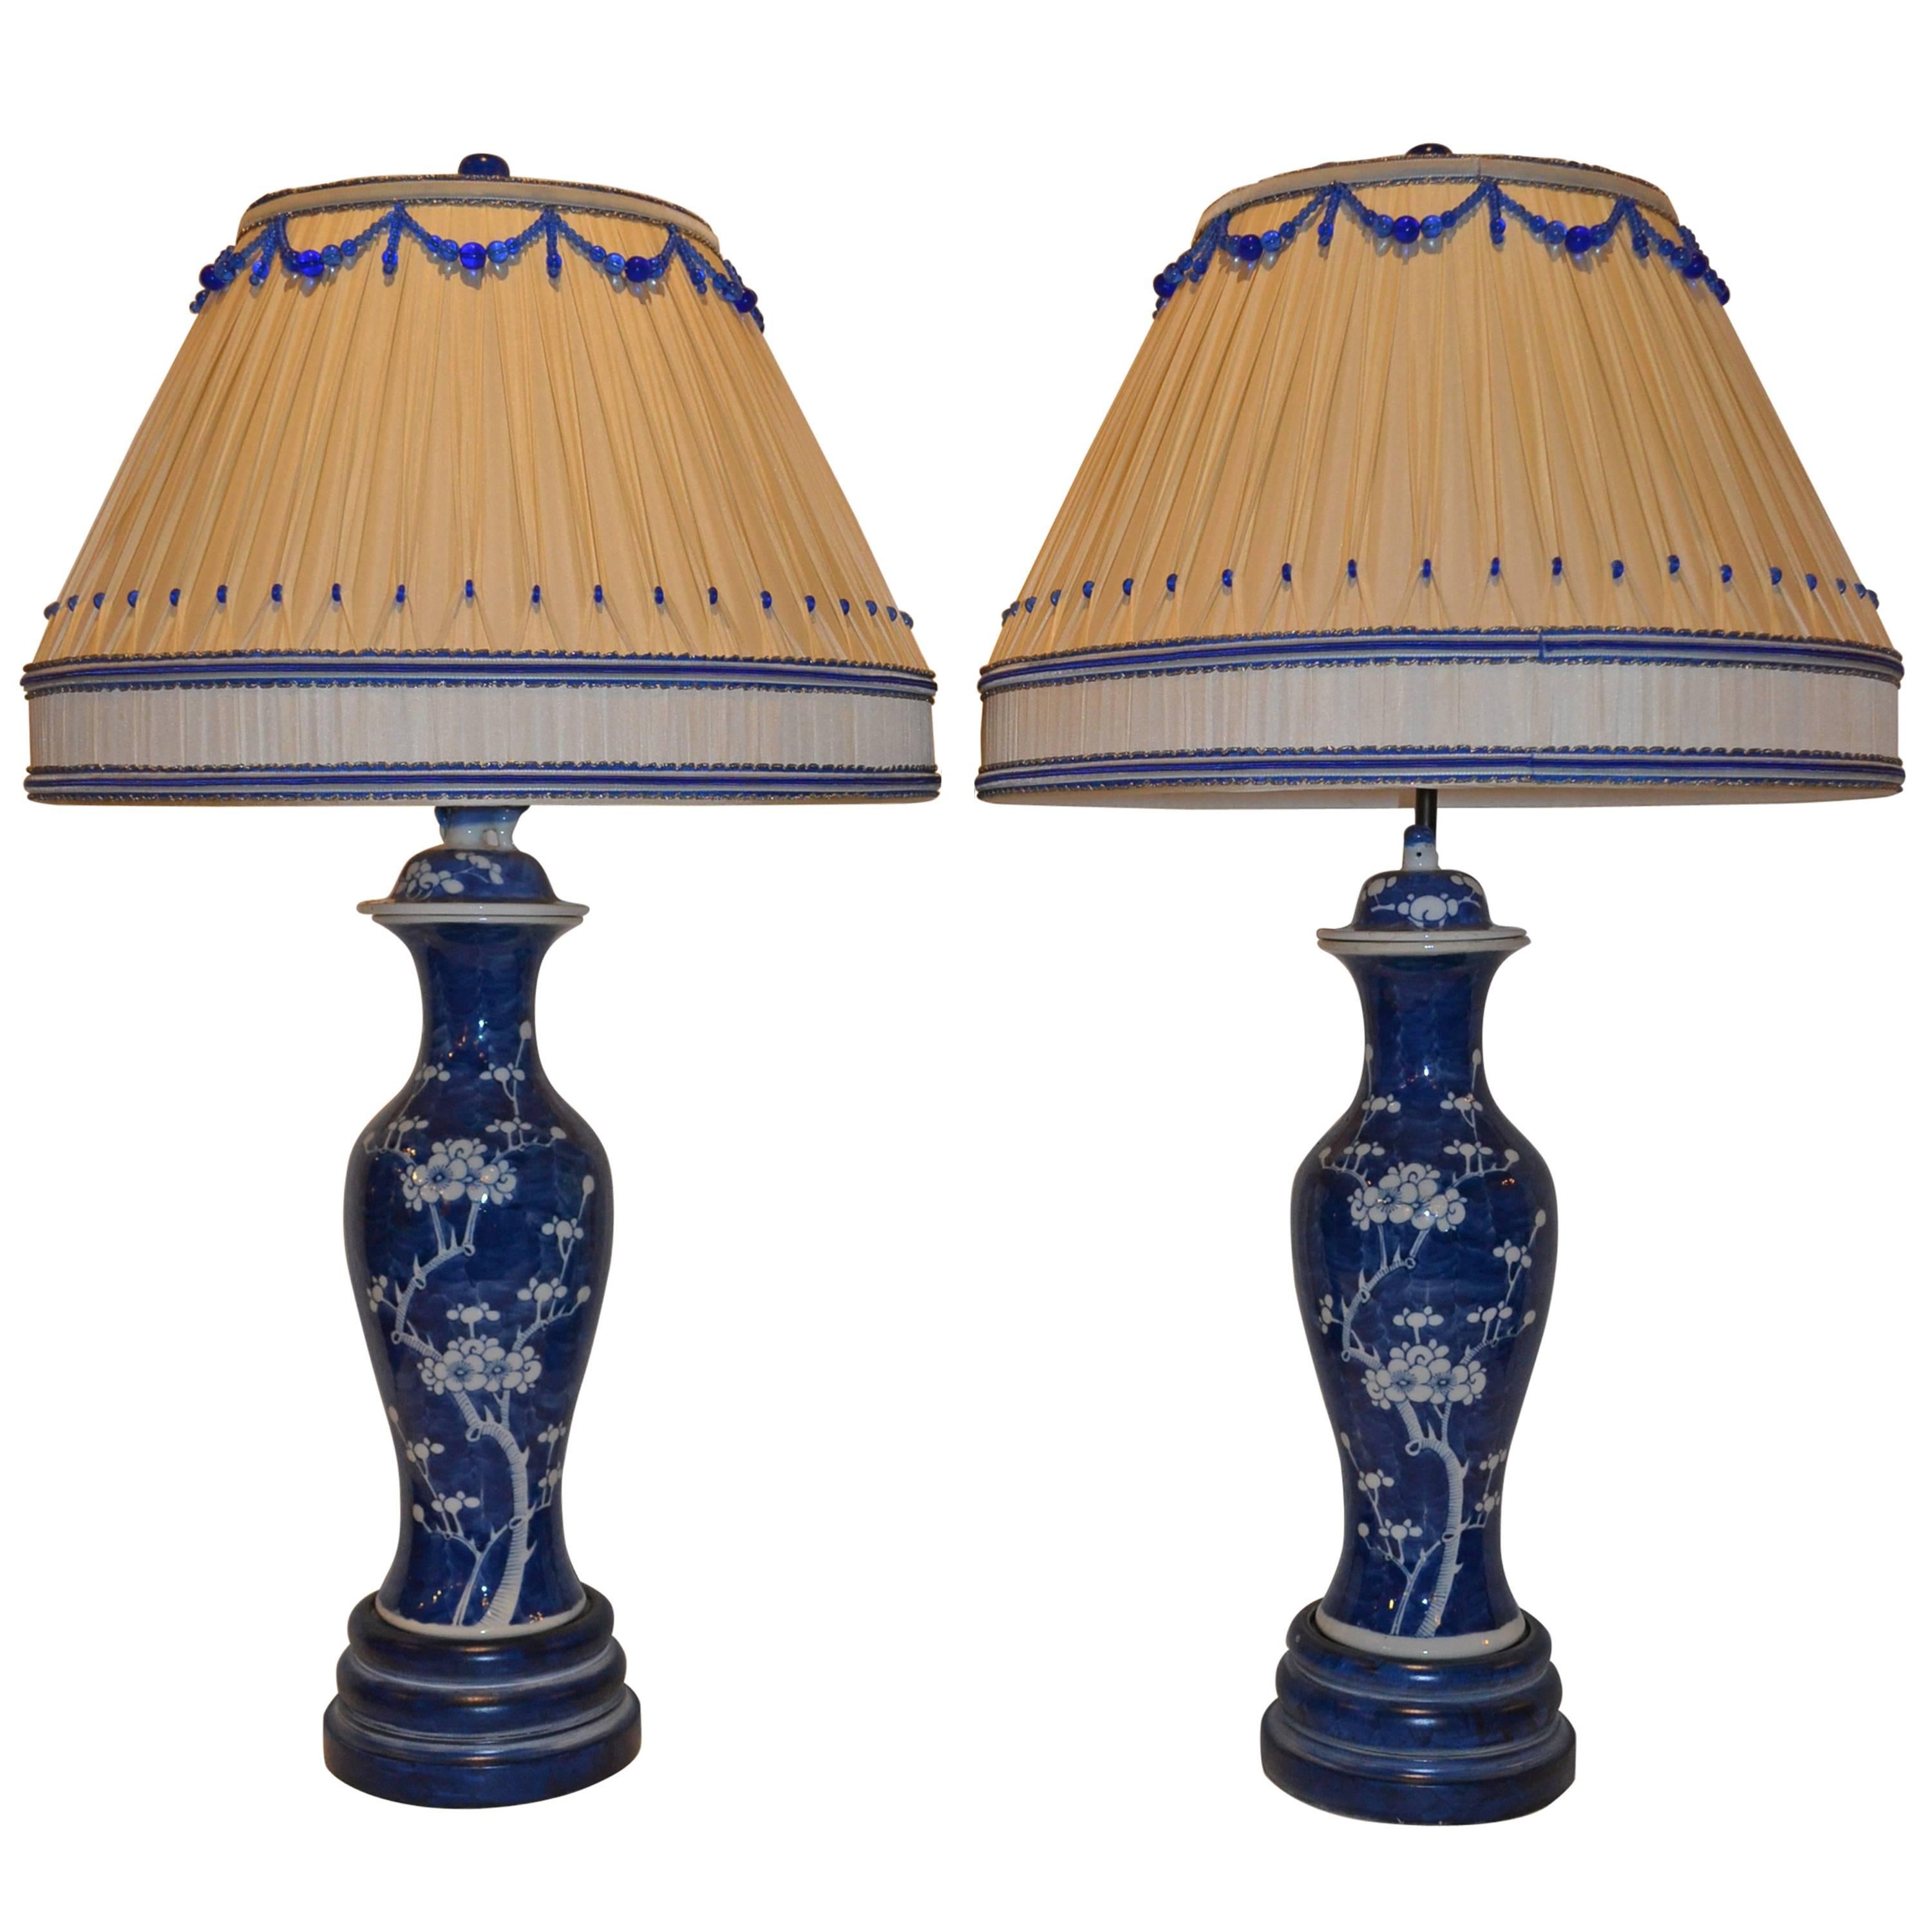 Pair of Blue and White Lamps with Dressmaker Shades